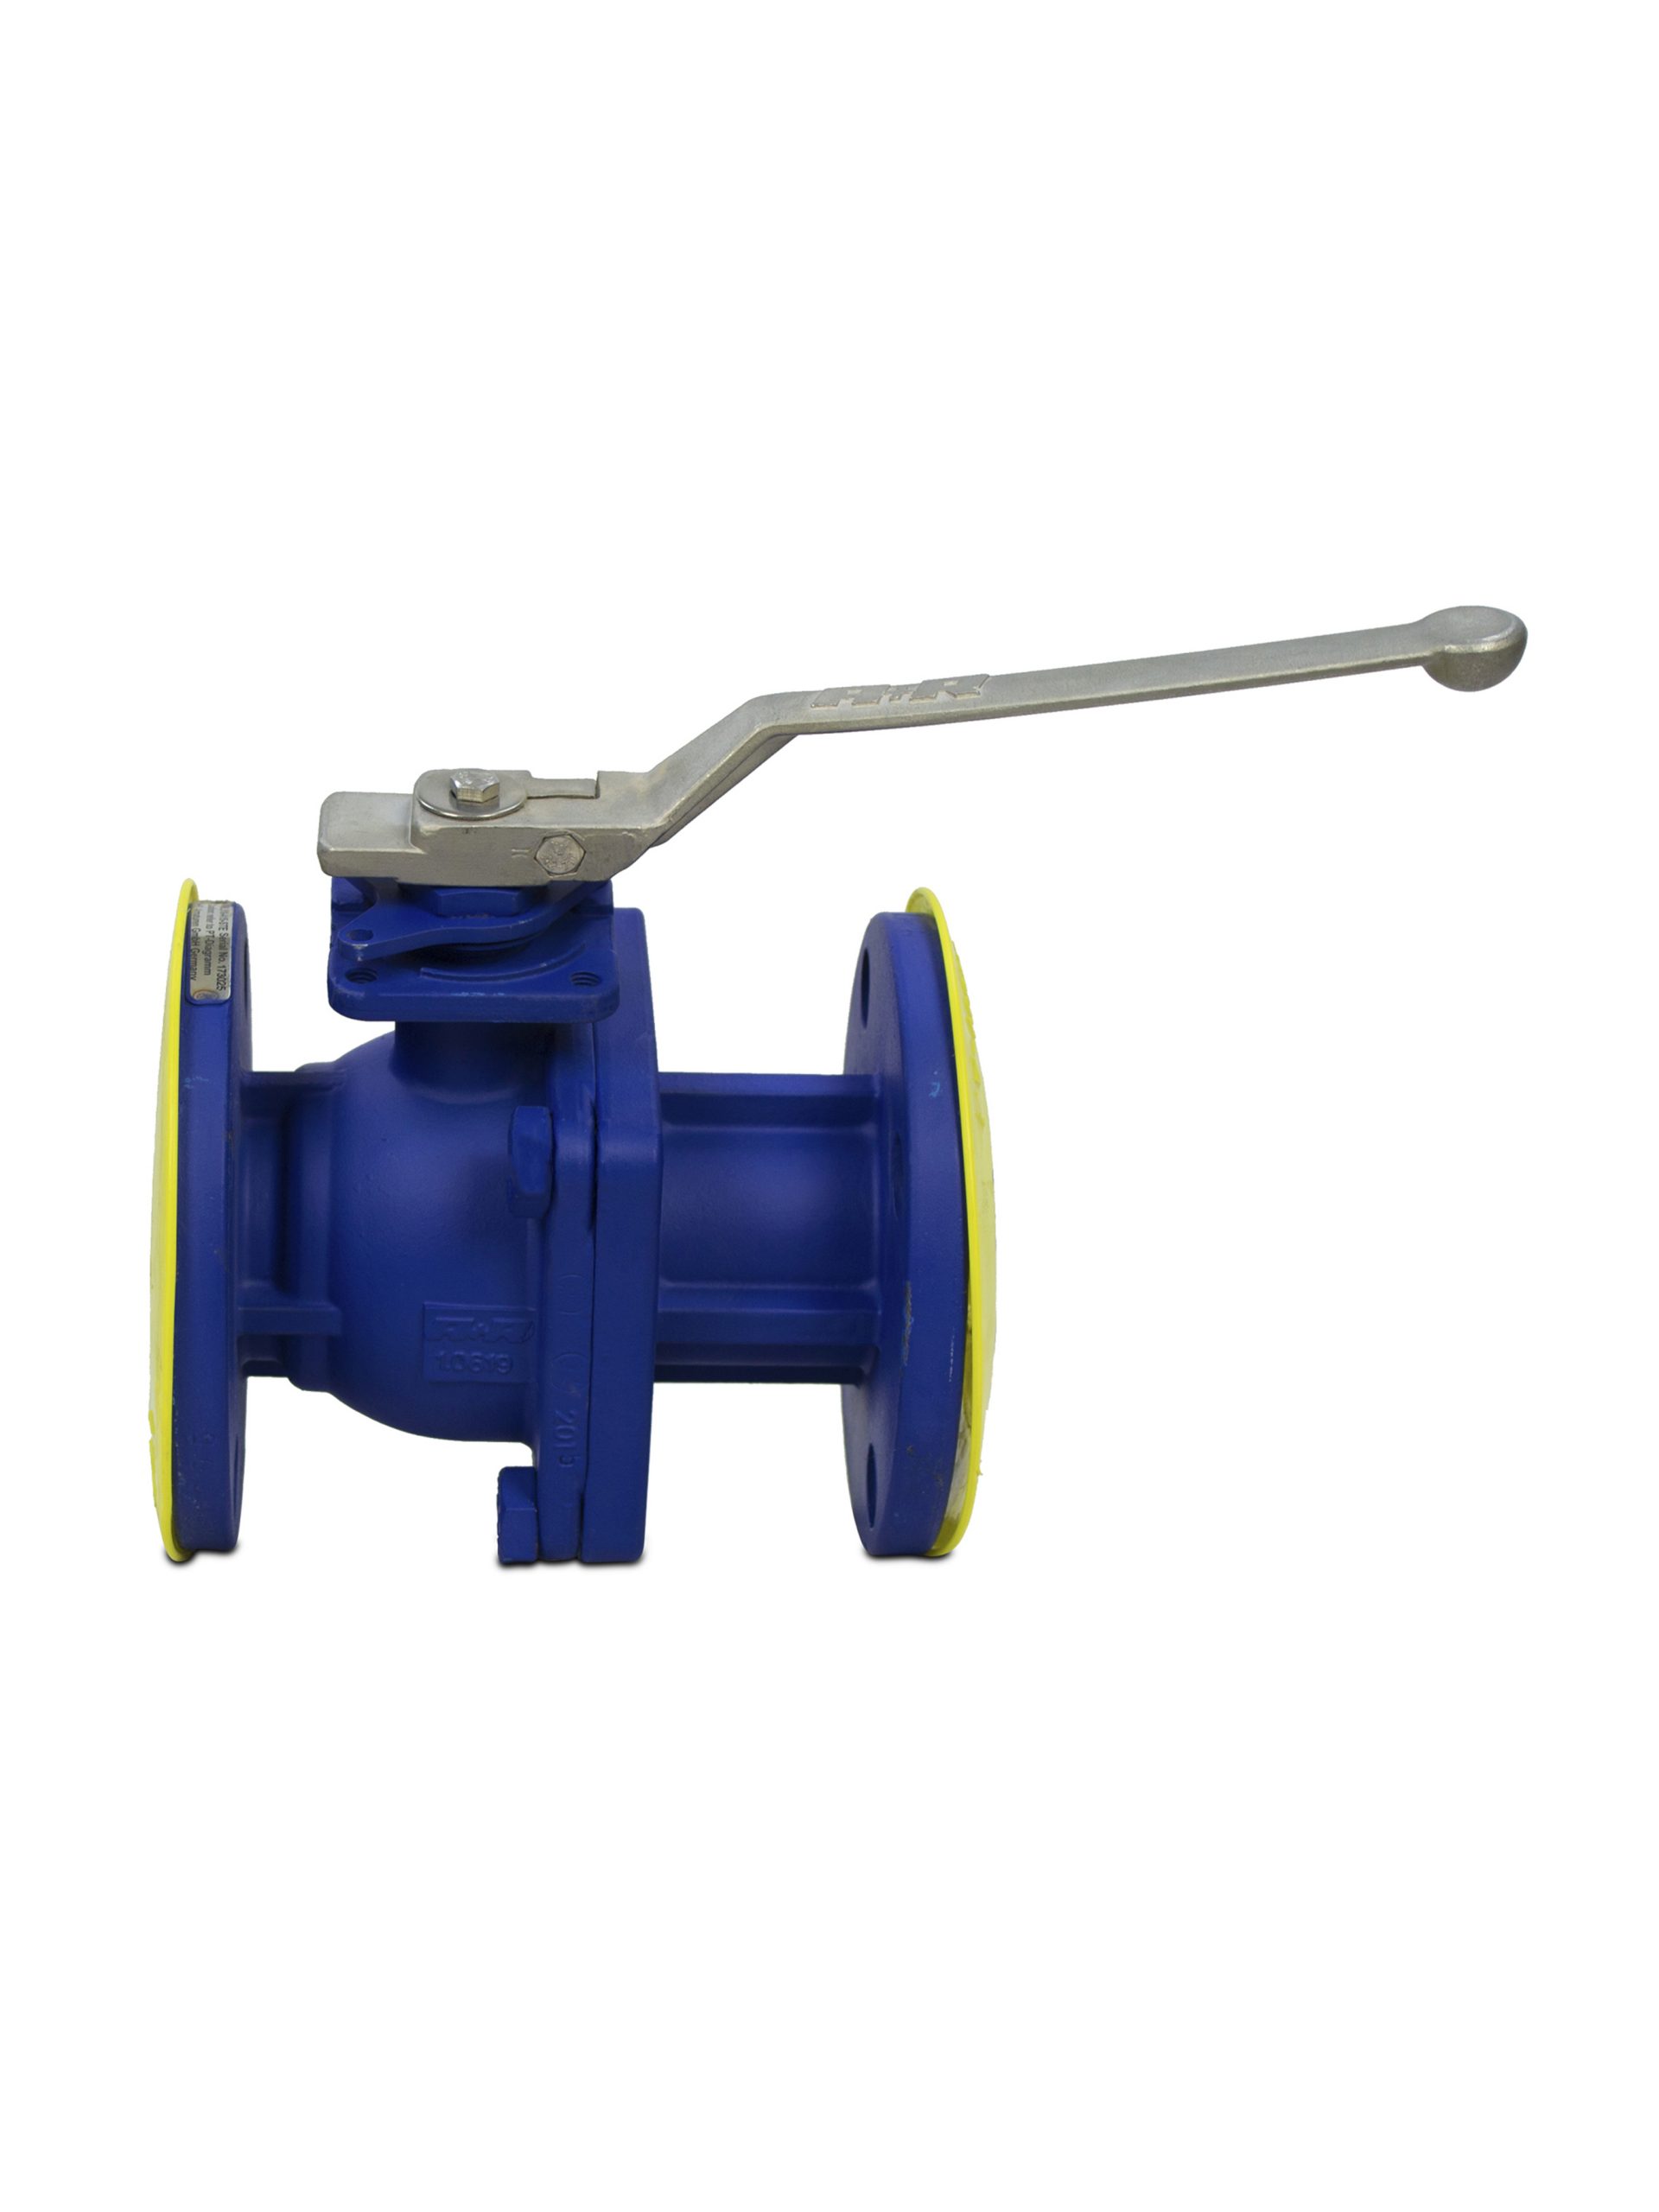 BALL VALVE 4 INCHES DN100 FLANGE TYPE in UAE